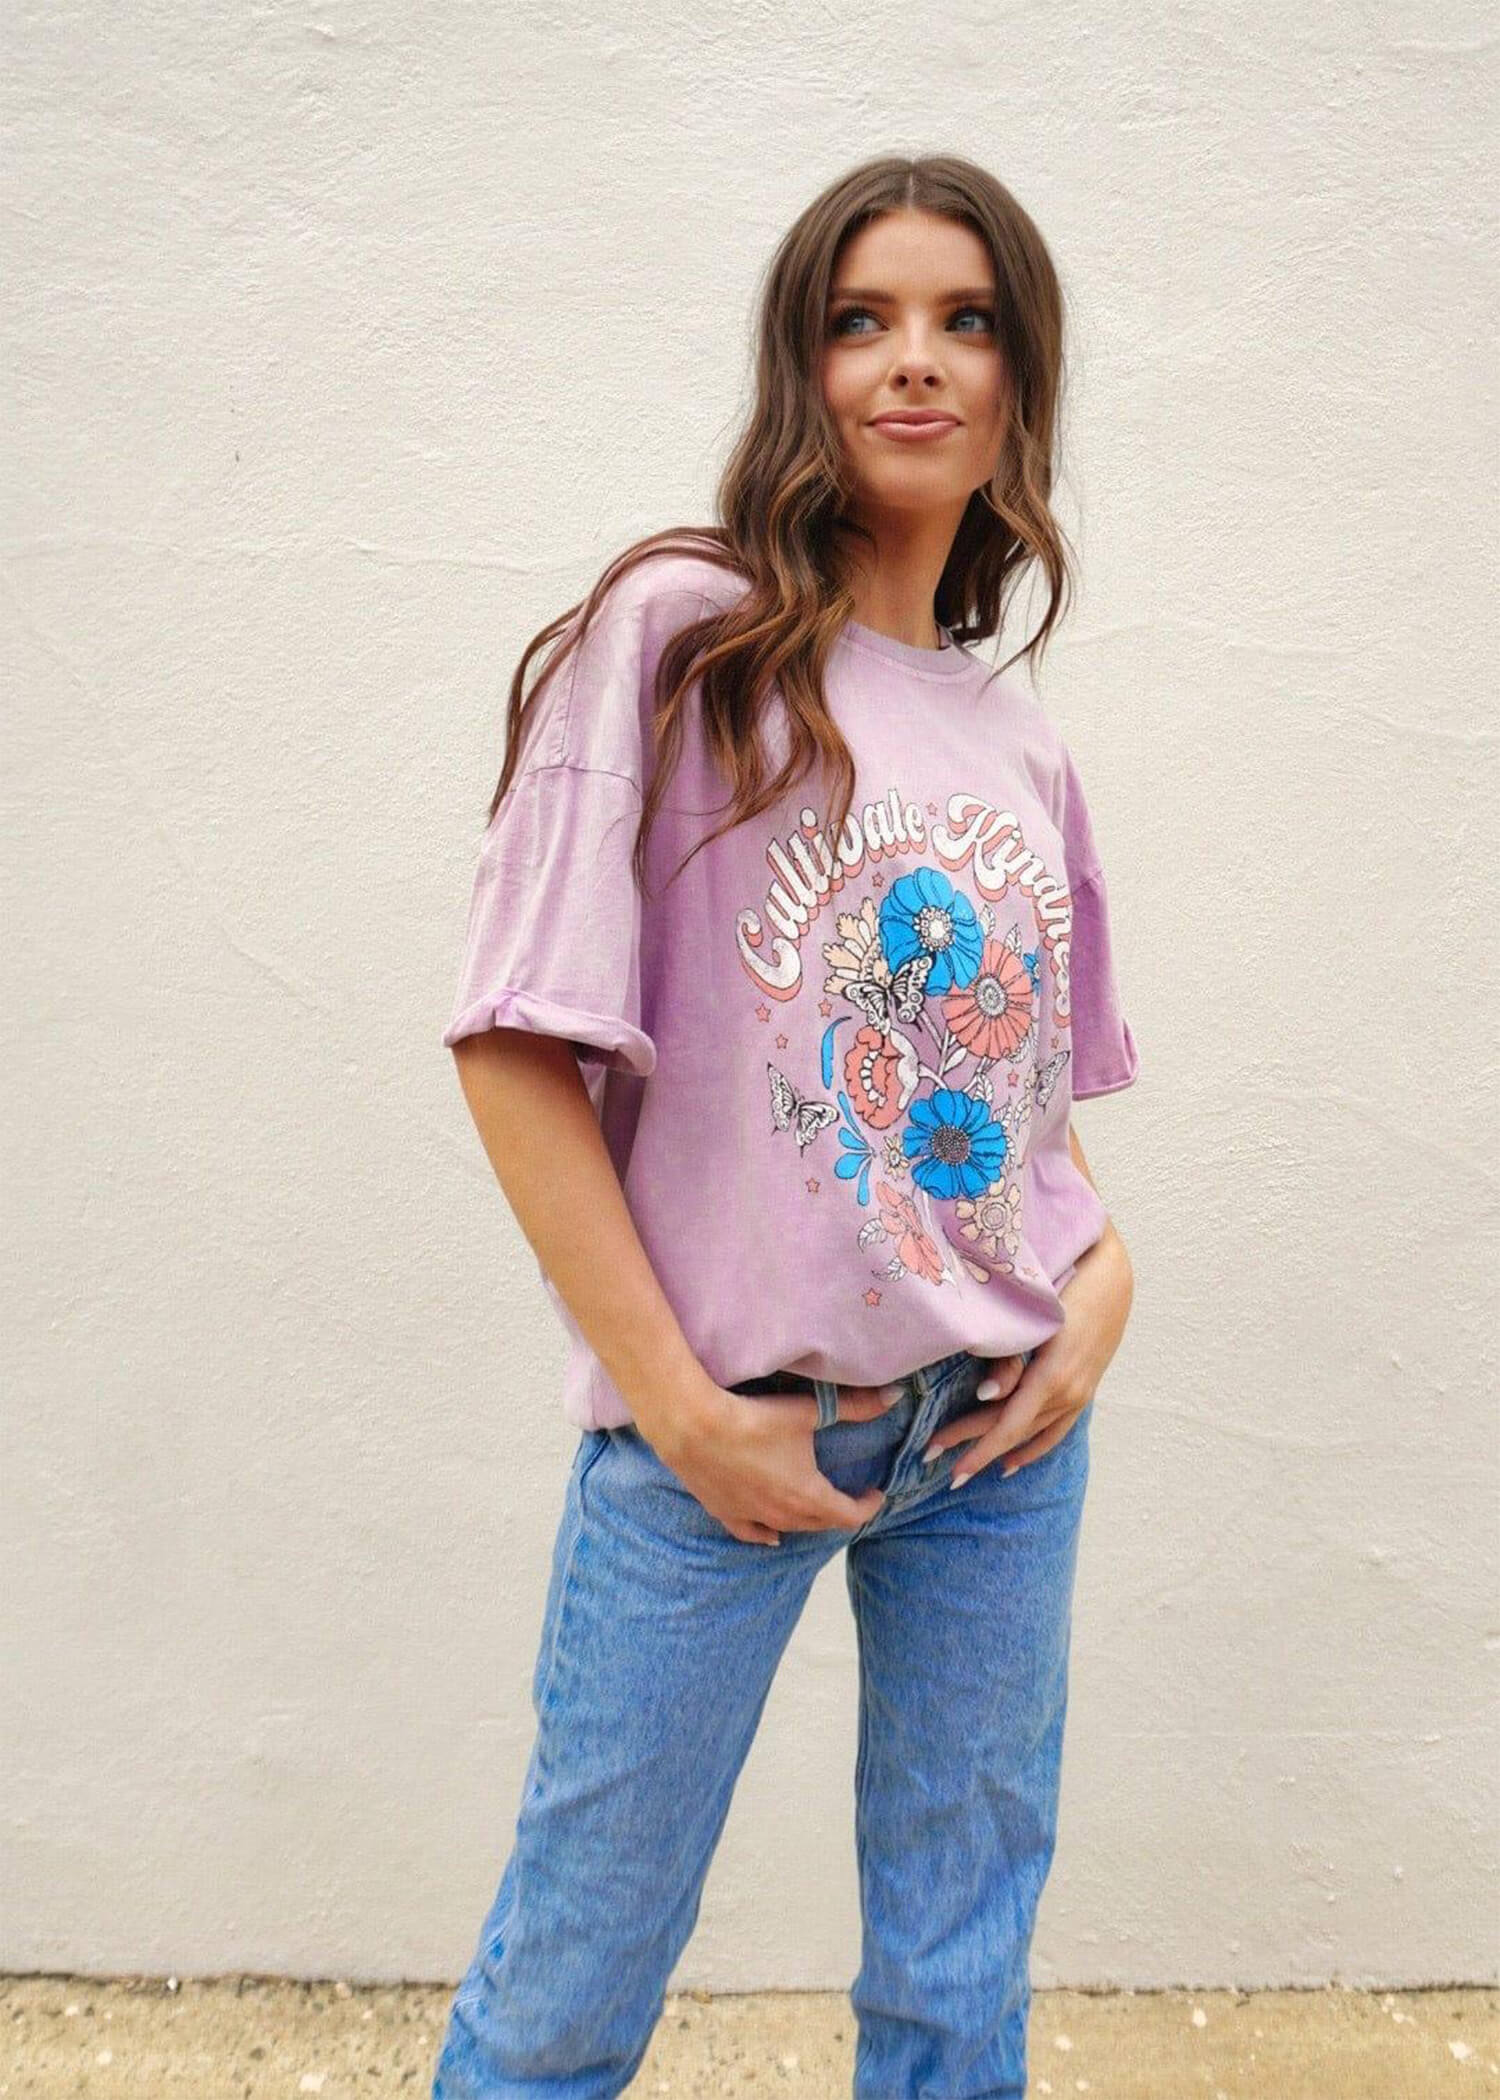 Cultivate Kindness Tee - Lilac T-Shirt MerciGrace Boutique.